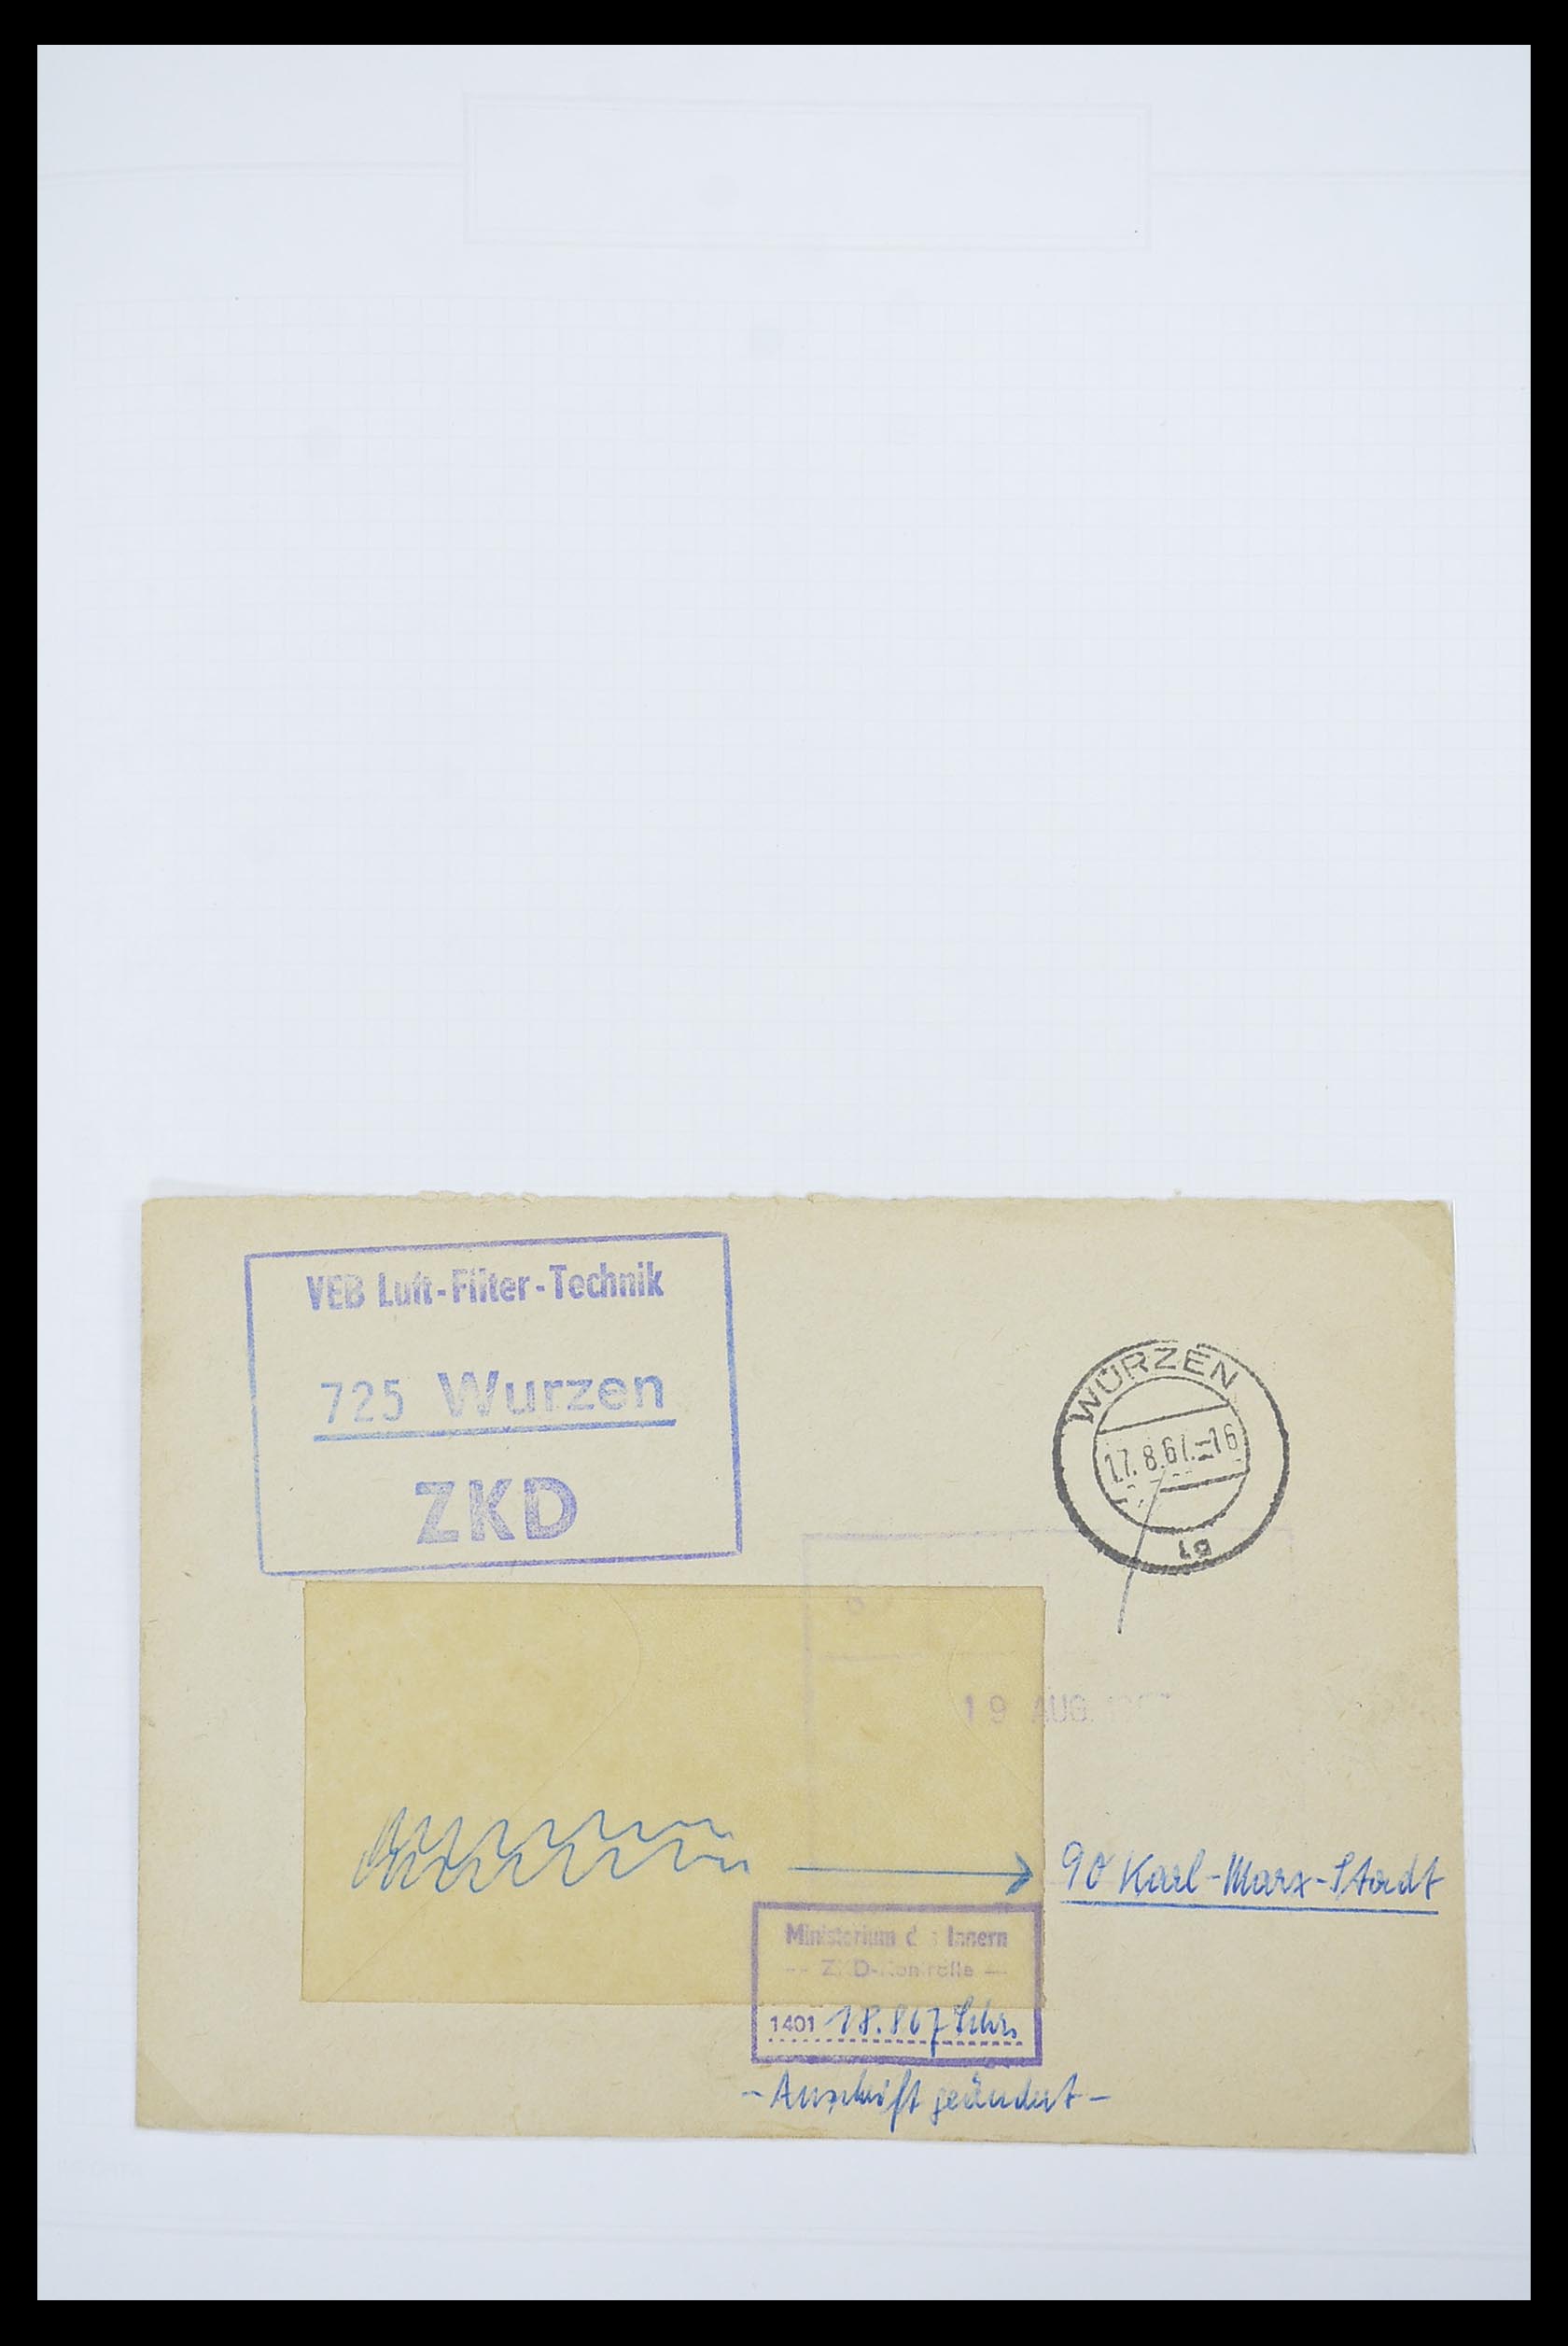 33883 022 - Stamp collection 33883 DDR service covers 1956-1986.